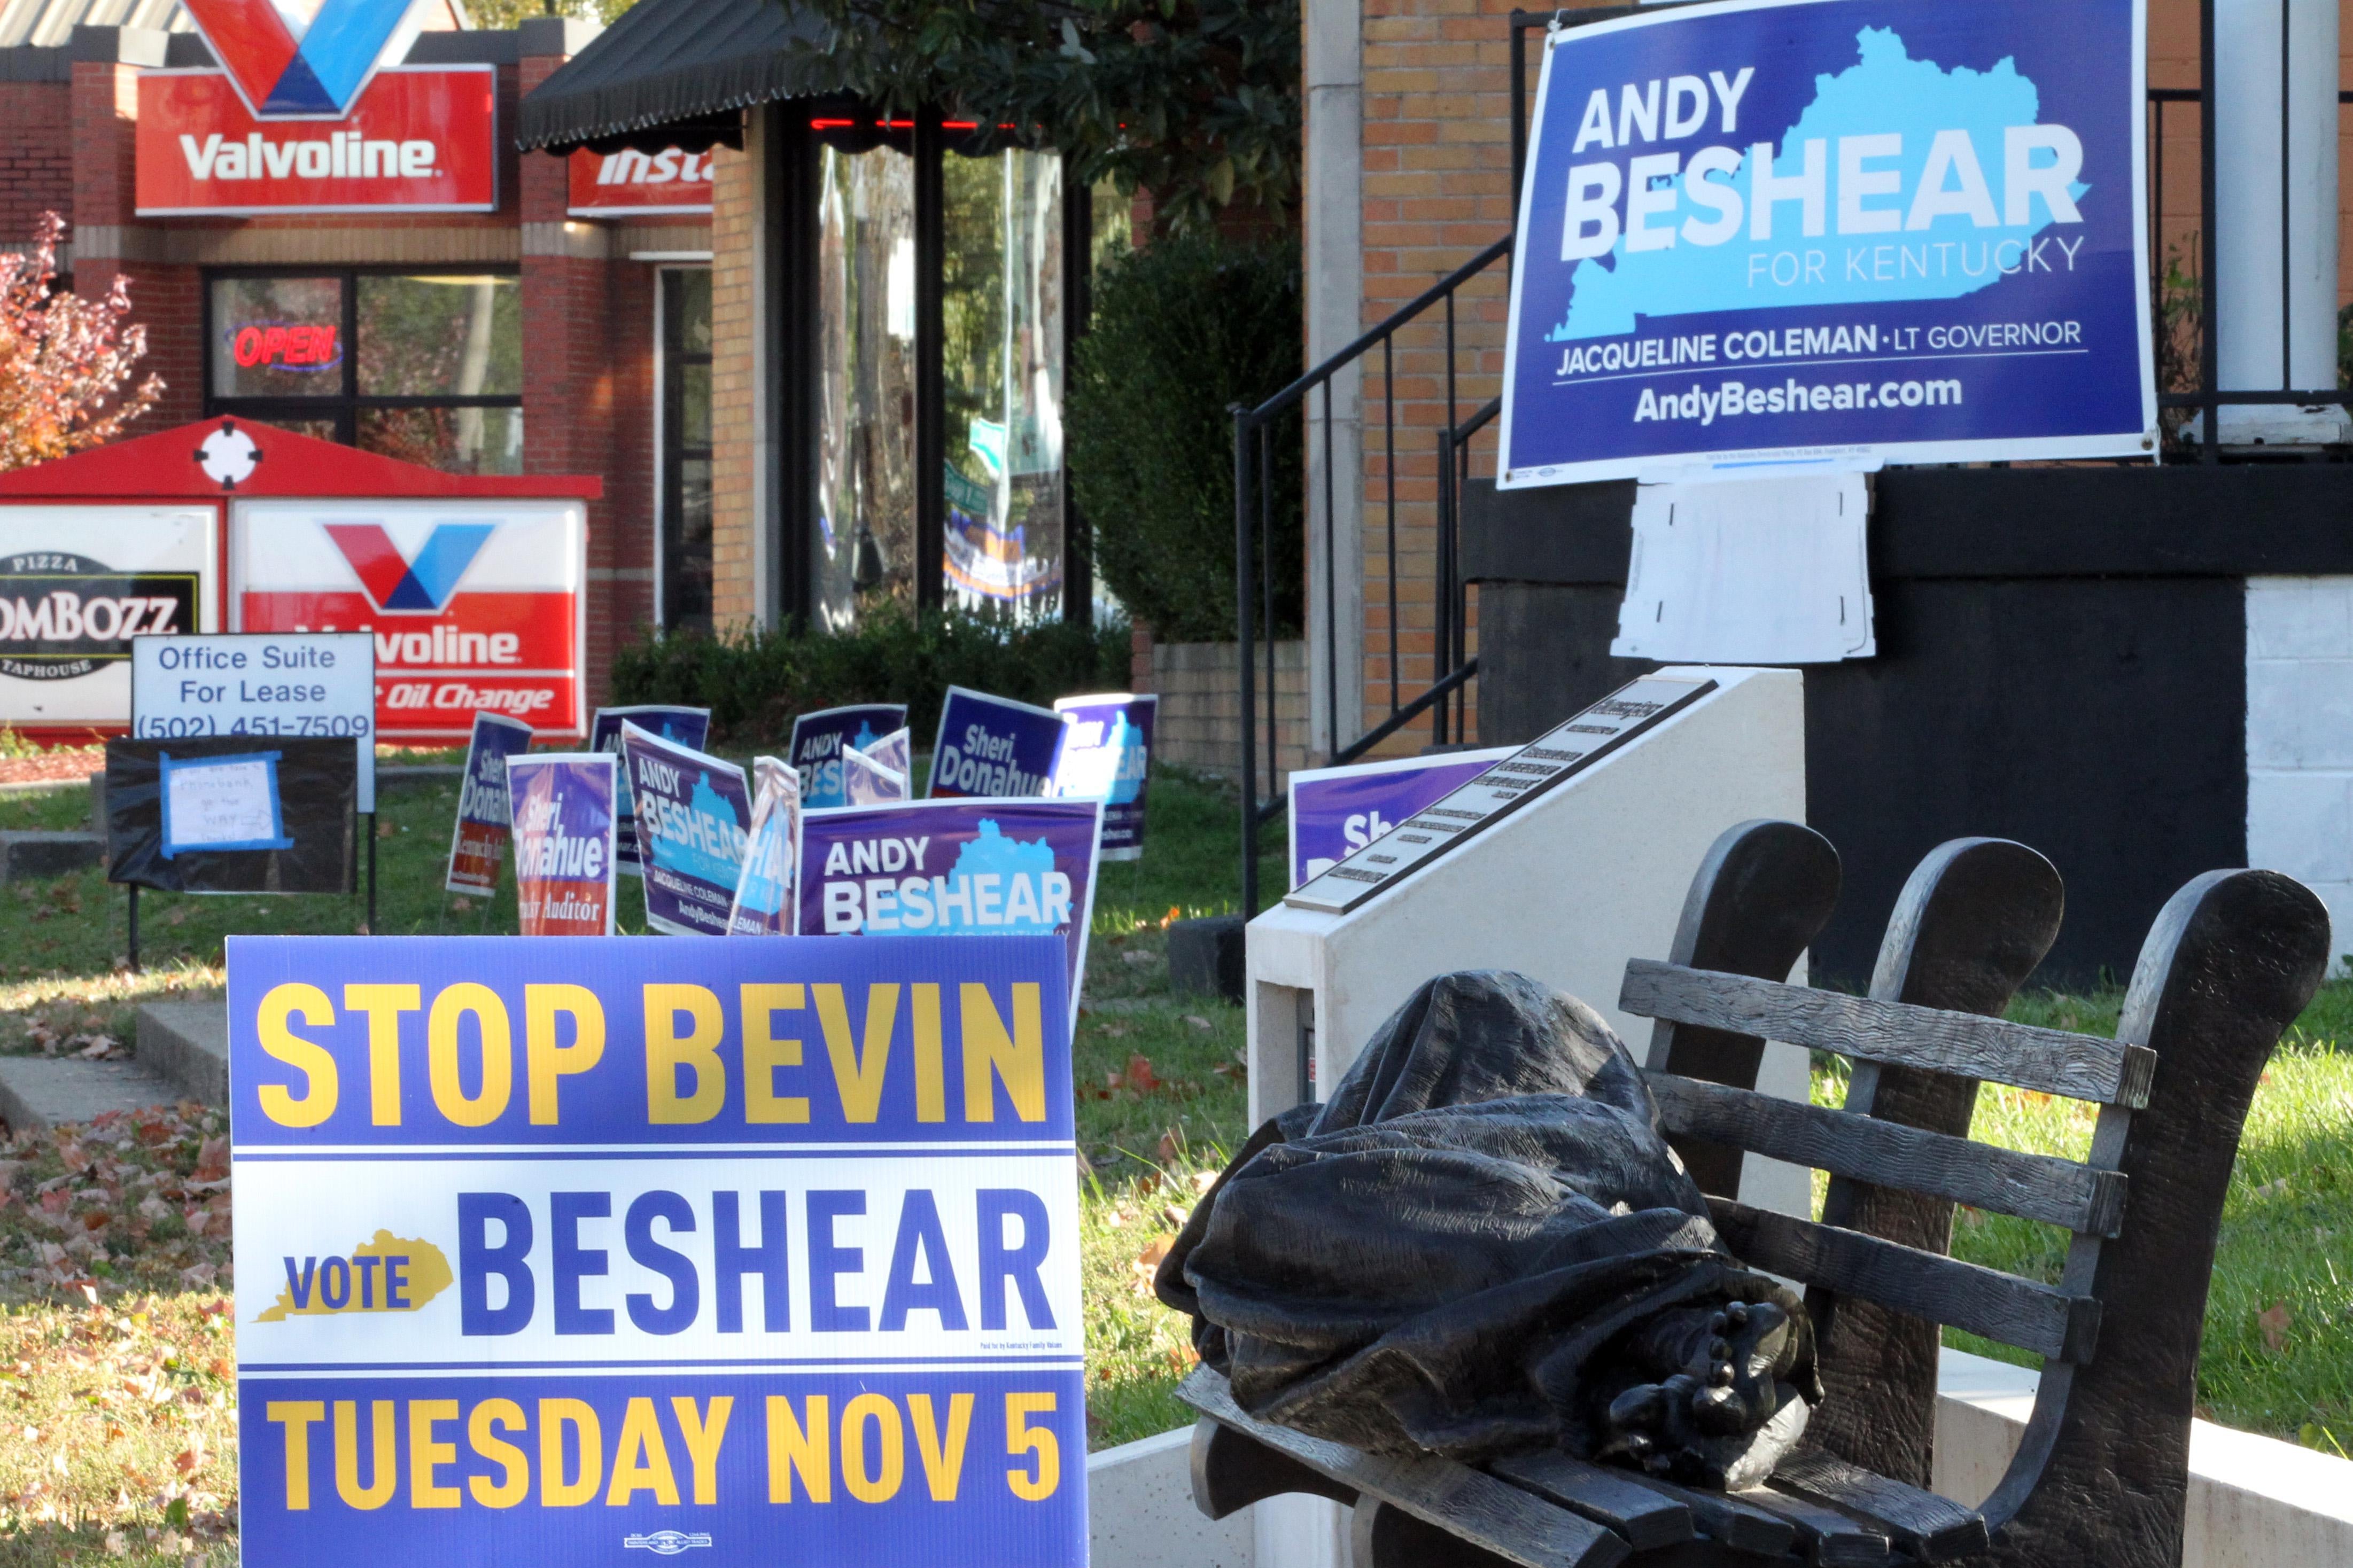 Campaign signs seen outside of a polling precinct in Kentucky